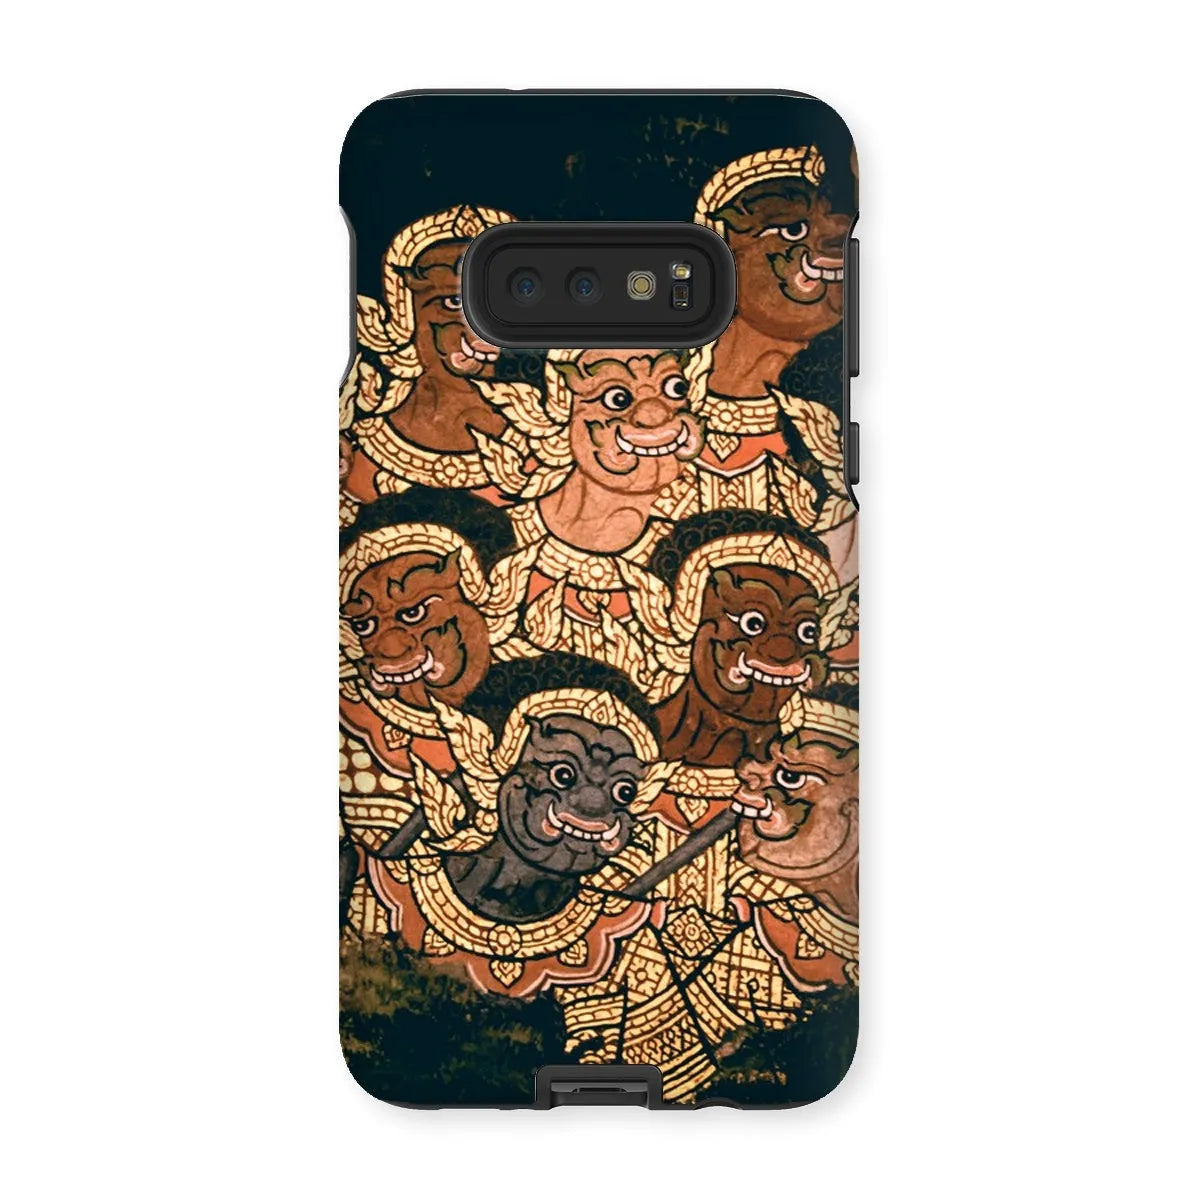 Babes In The Woods - Thailand Aesthetic Art Phone Case - Samsung Galaxy S10e / Matte - Mobile Phone Cases - Aesthetic